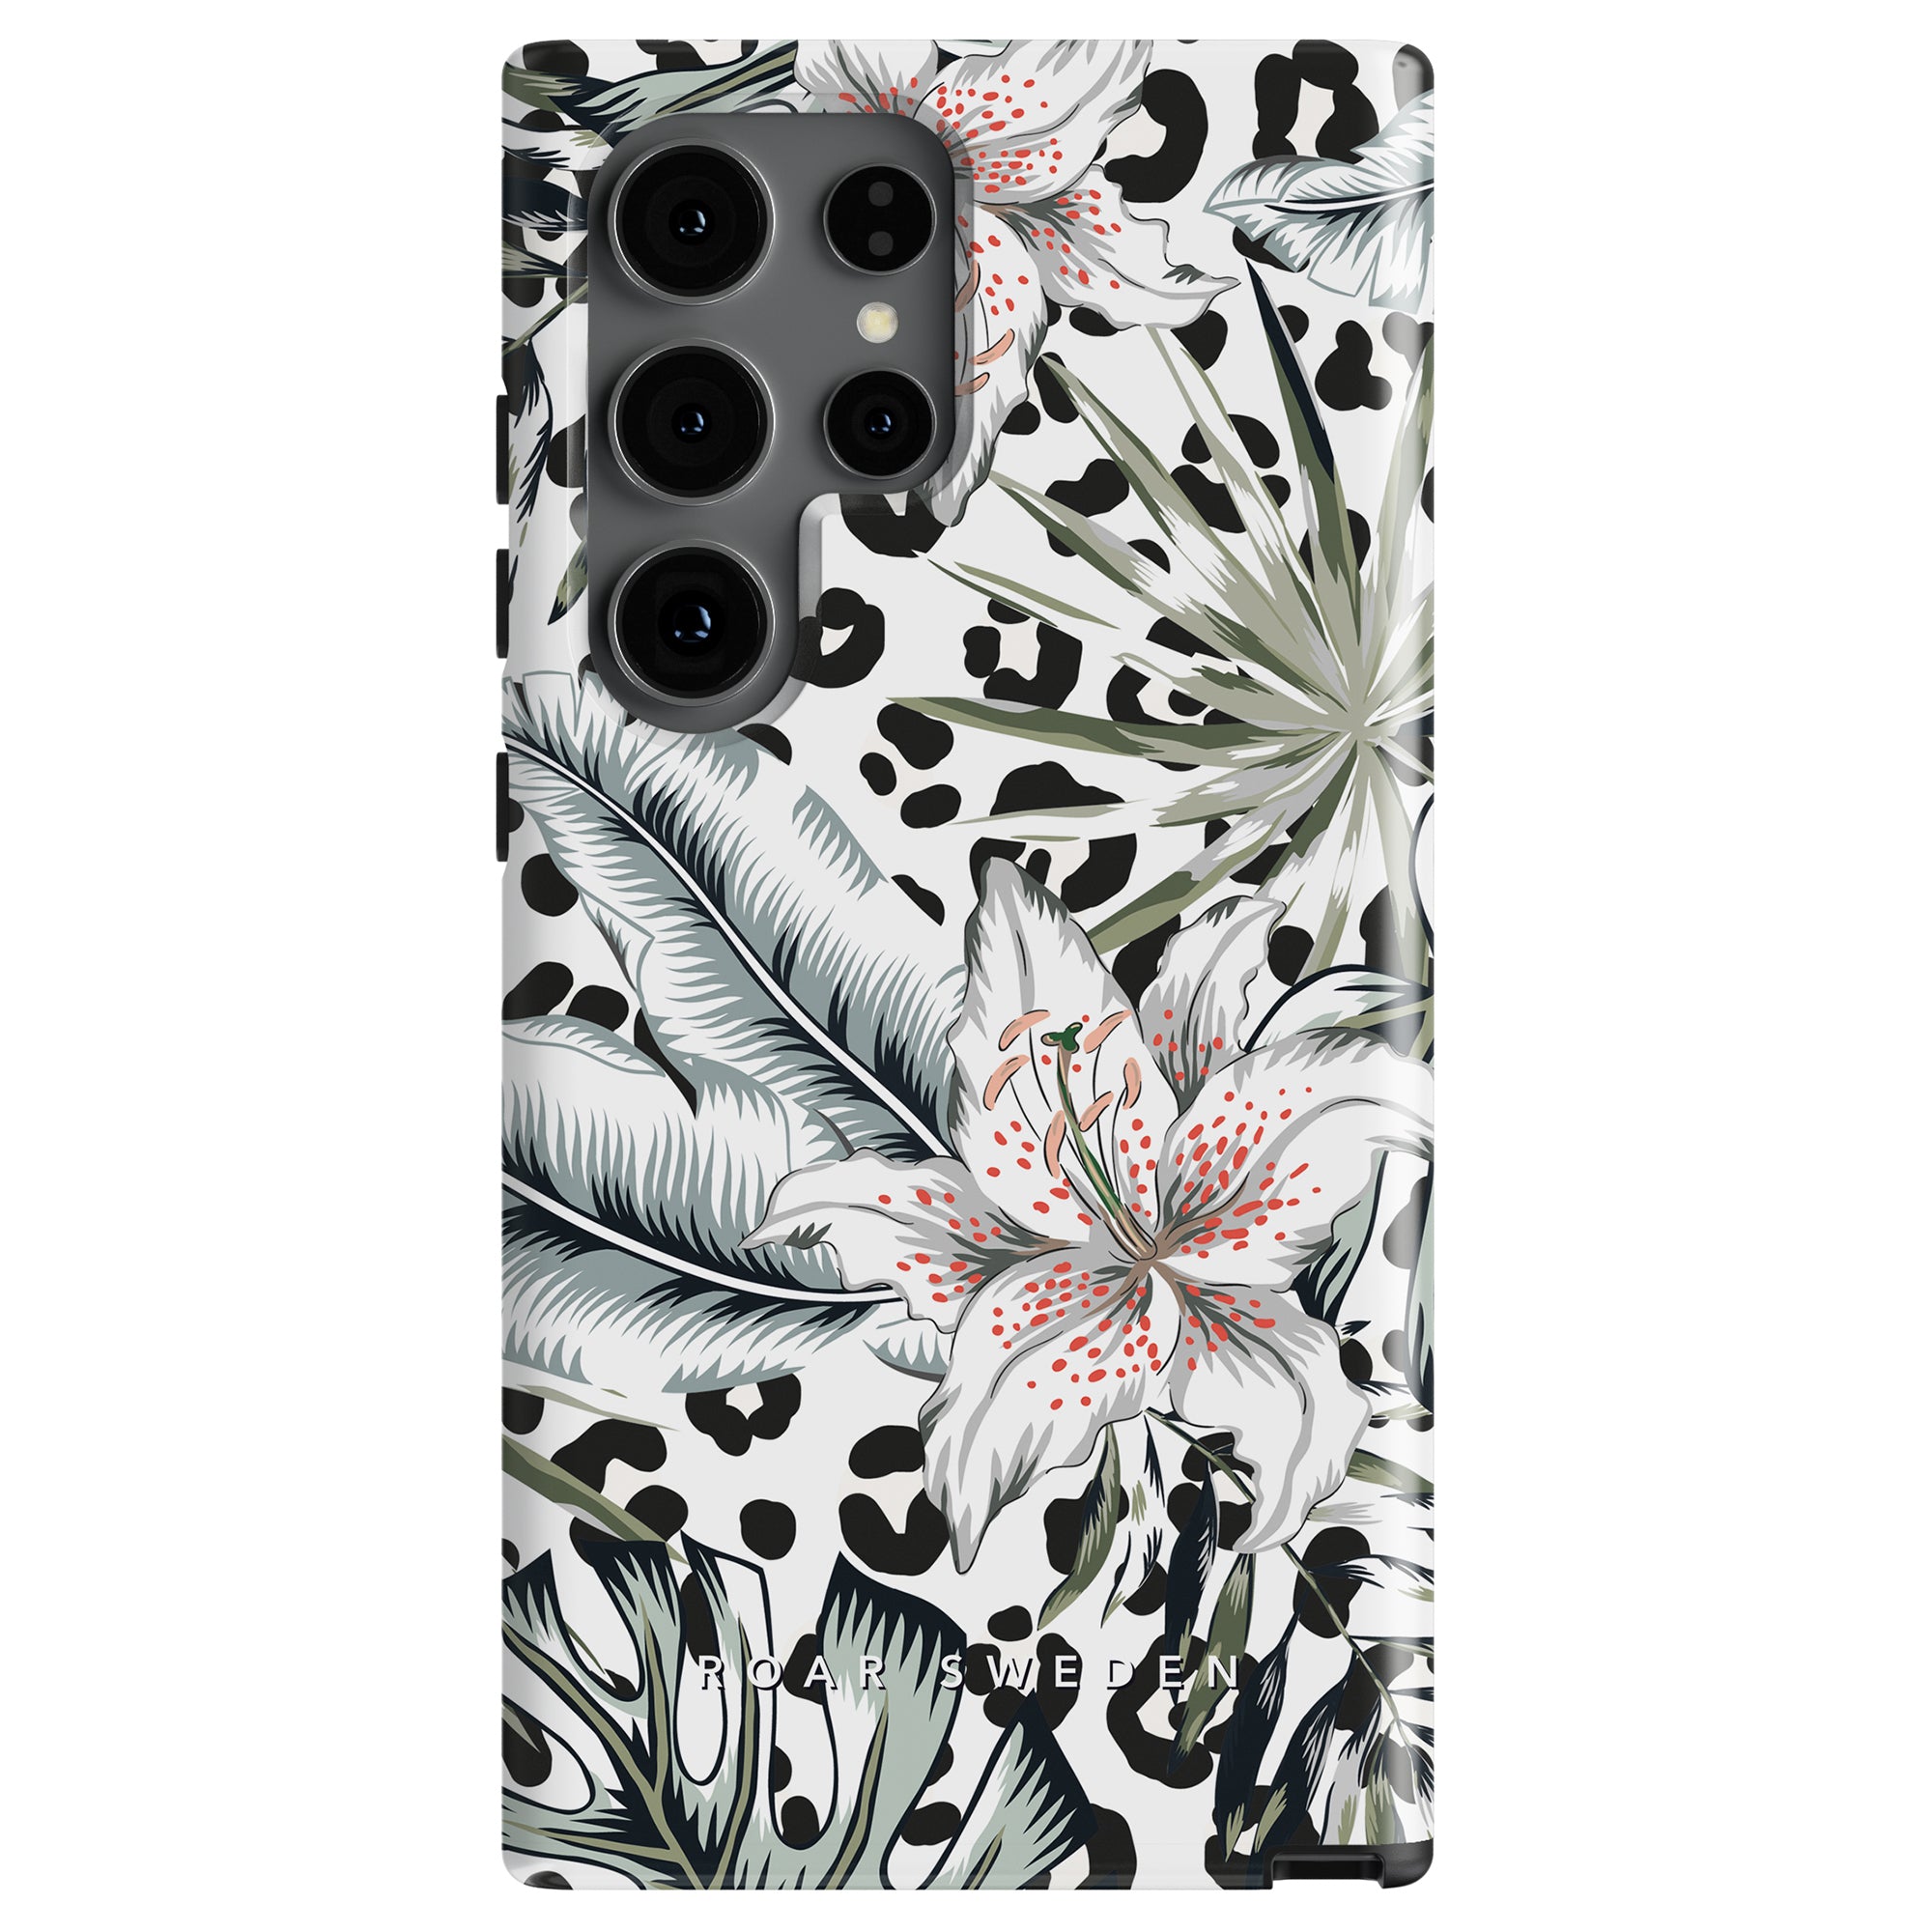 Lily - Tough case with floral and leaf patterns, featuring vita liljor with pink accents, green palm leaves, and a black leopardmönster background. The word "SCARVESWEEN" is printed at the bottom.